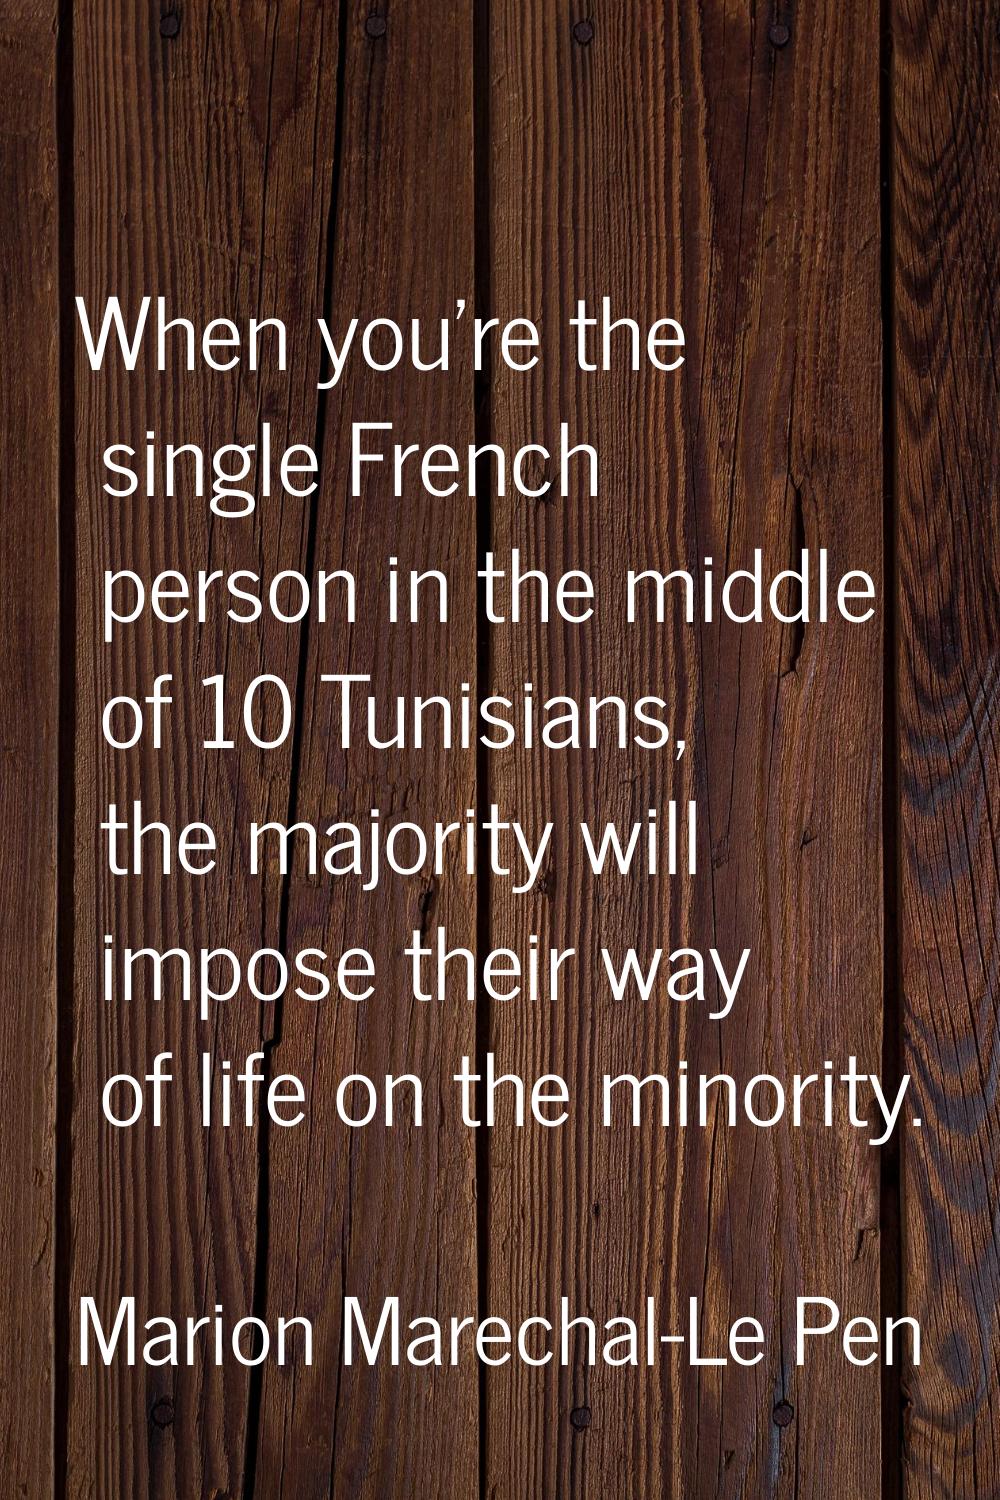 When you're the single French person in the middle of 10 Tunisians, the majority will impose their 